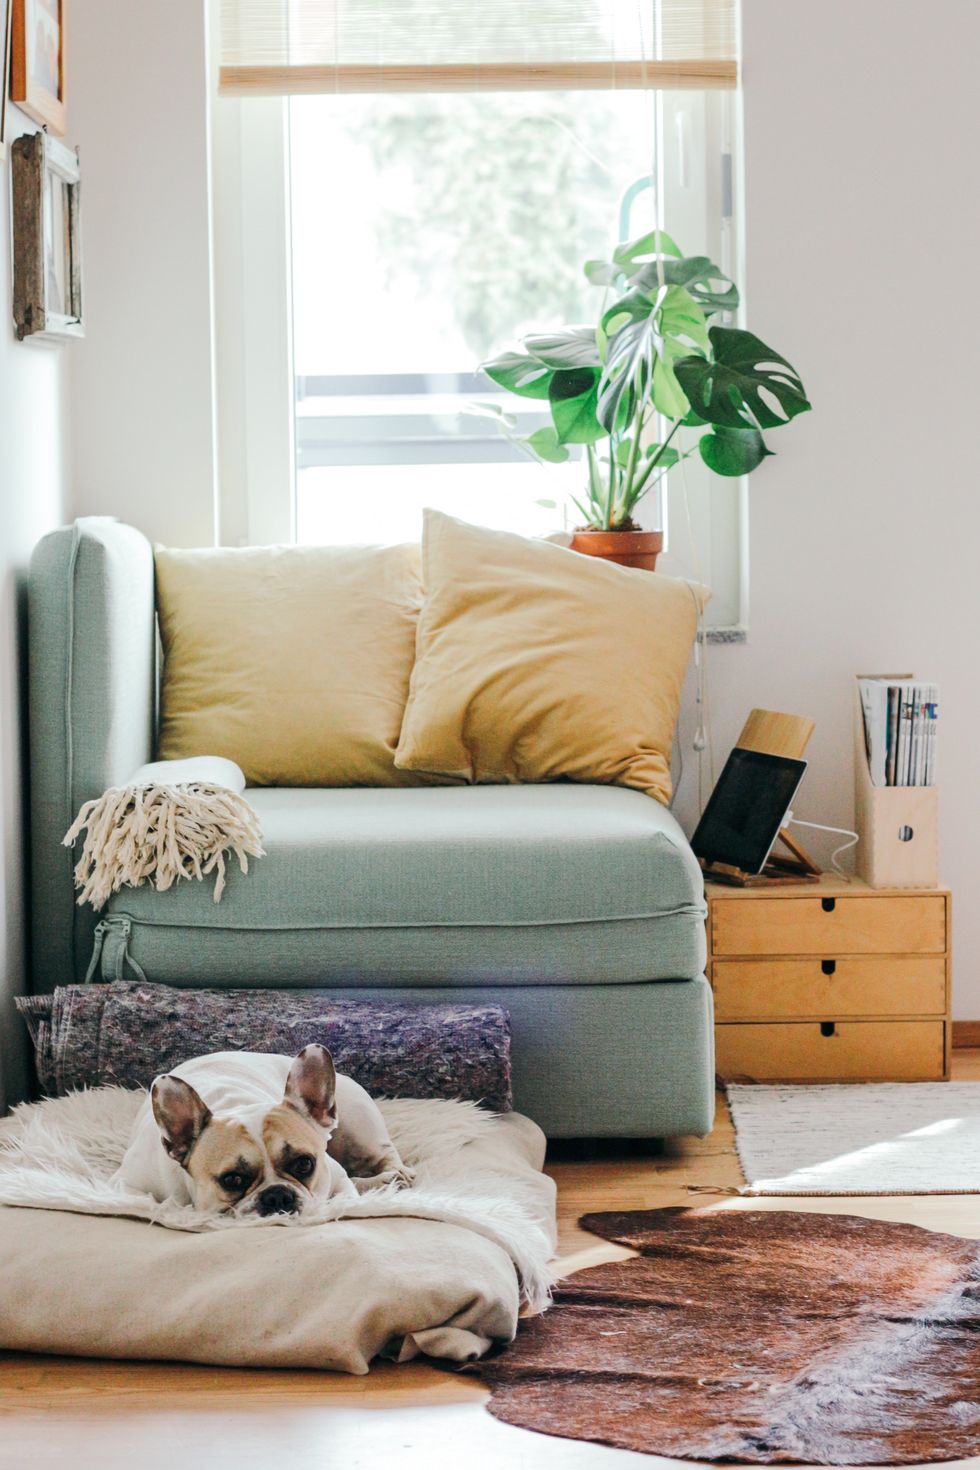 4 Tips for Keeping Your Home Comfortable and Healthy While Working From Home